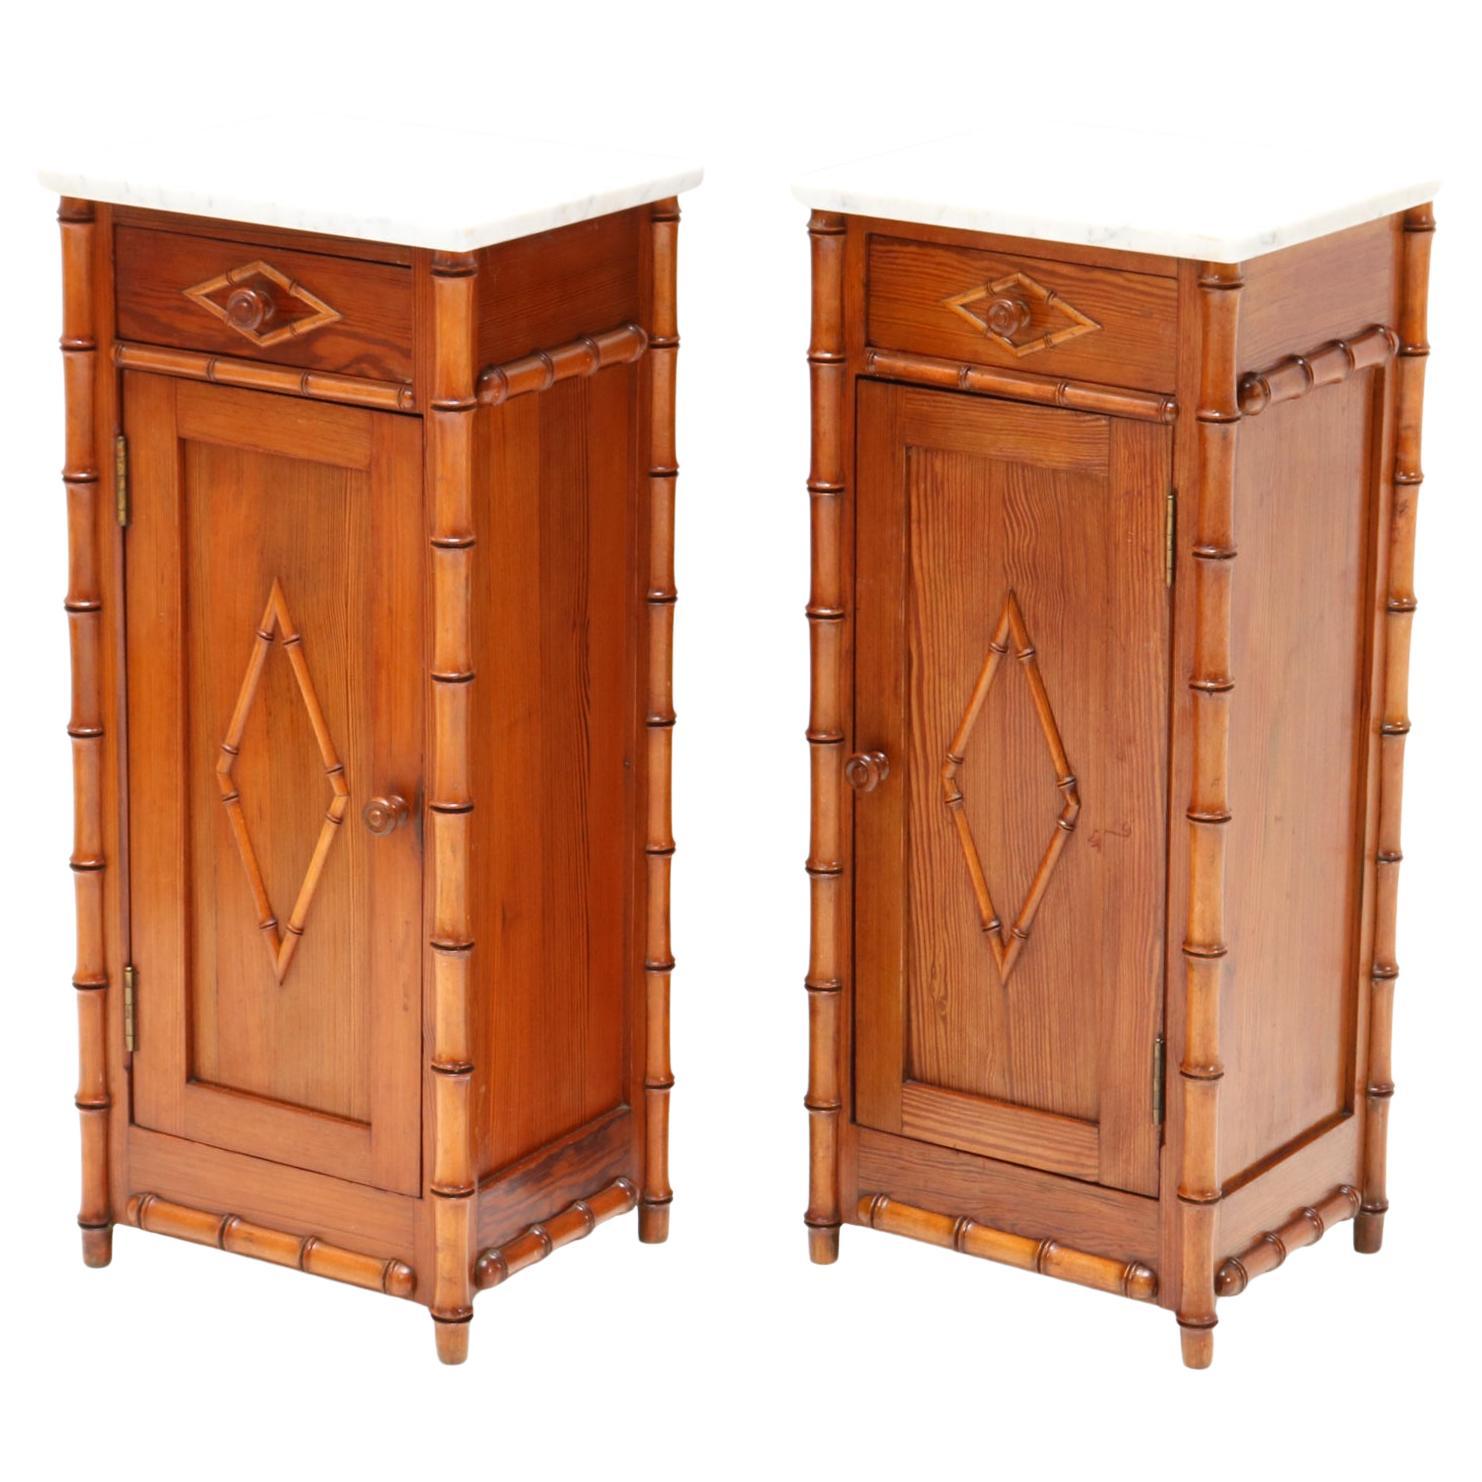 Two Art Nouveau Faux Bamboo Nightstands or Bedside Tables, 1900s